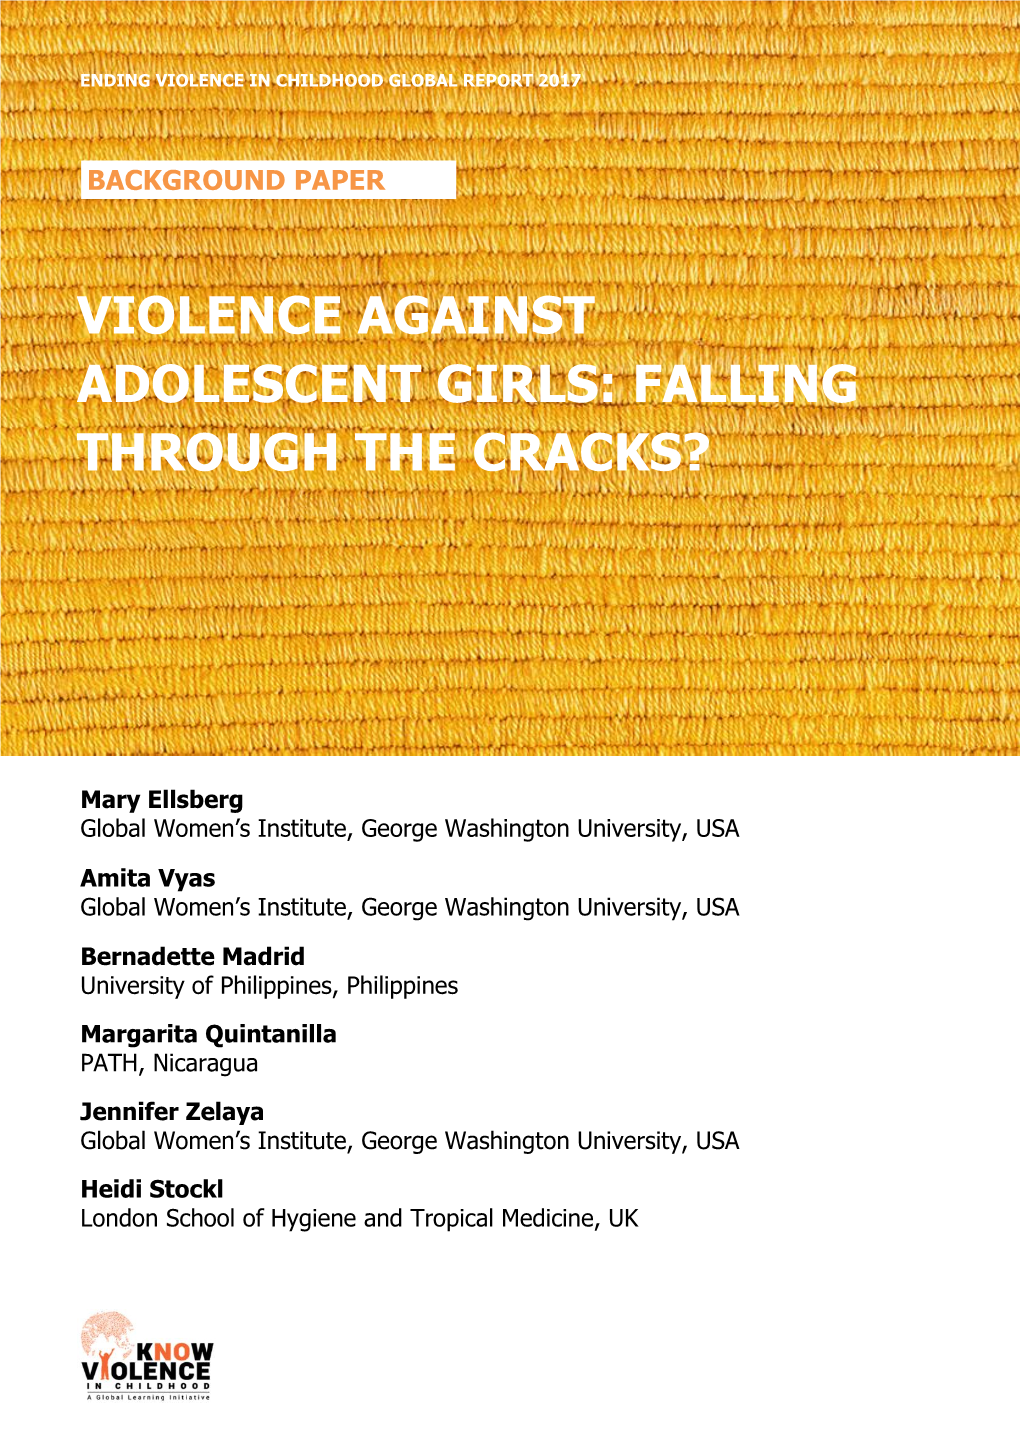 Violence Against Adolescent Girls: Falling Through the Cracks?